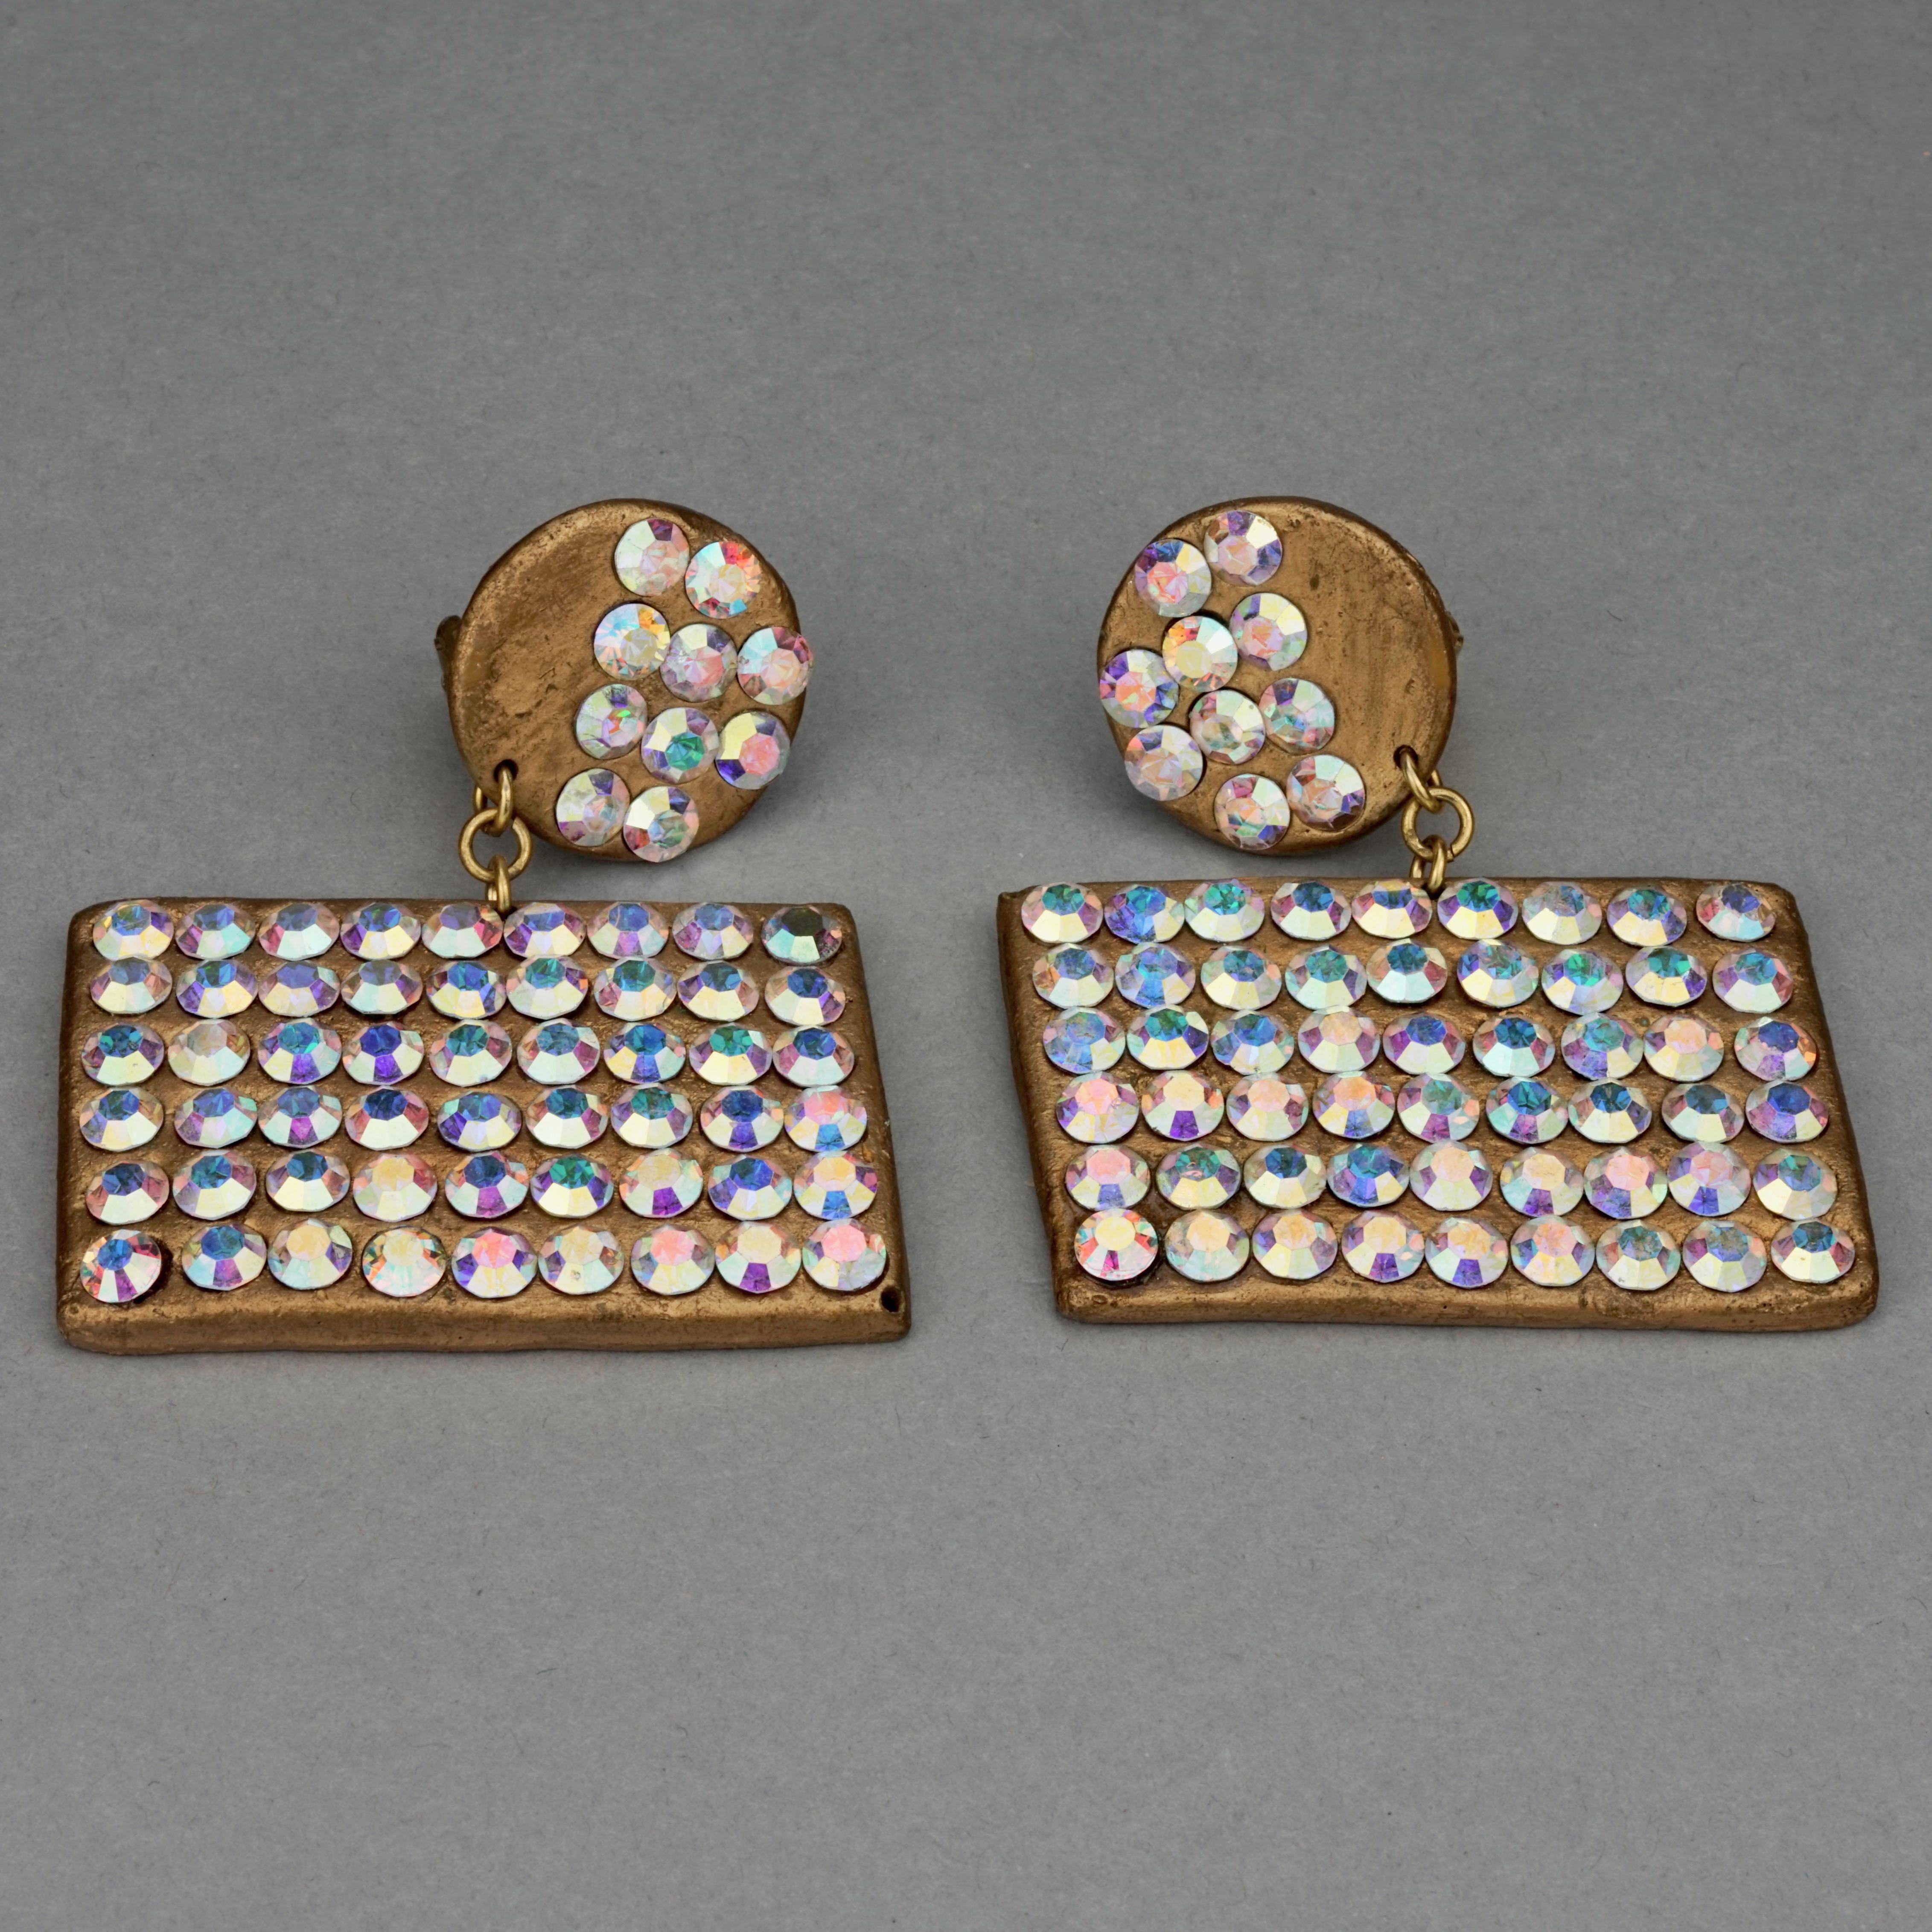 Vintage BILLY BOY SURREAL Bijoux Geometric Iridescent Crystal Dangling Earrings In Excellent Condition For Sale In Kingersheim, Alsace